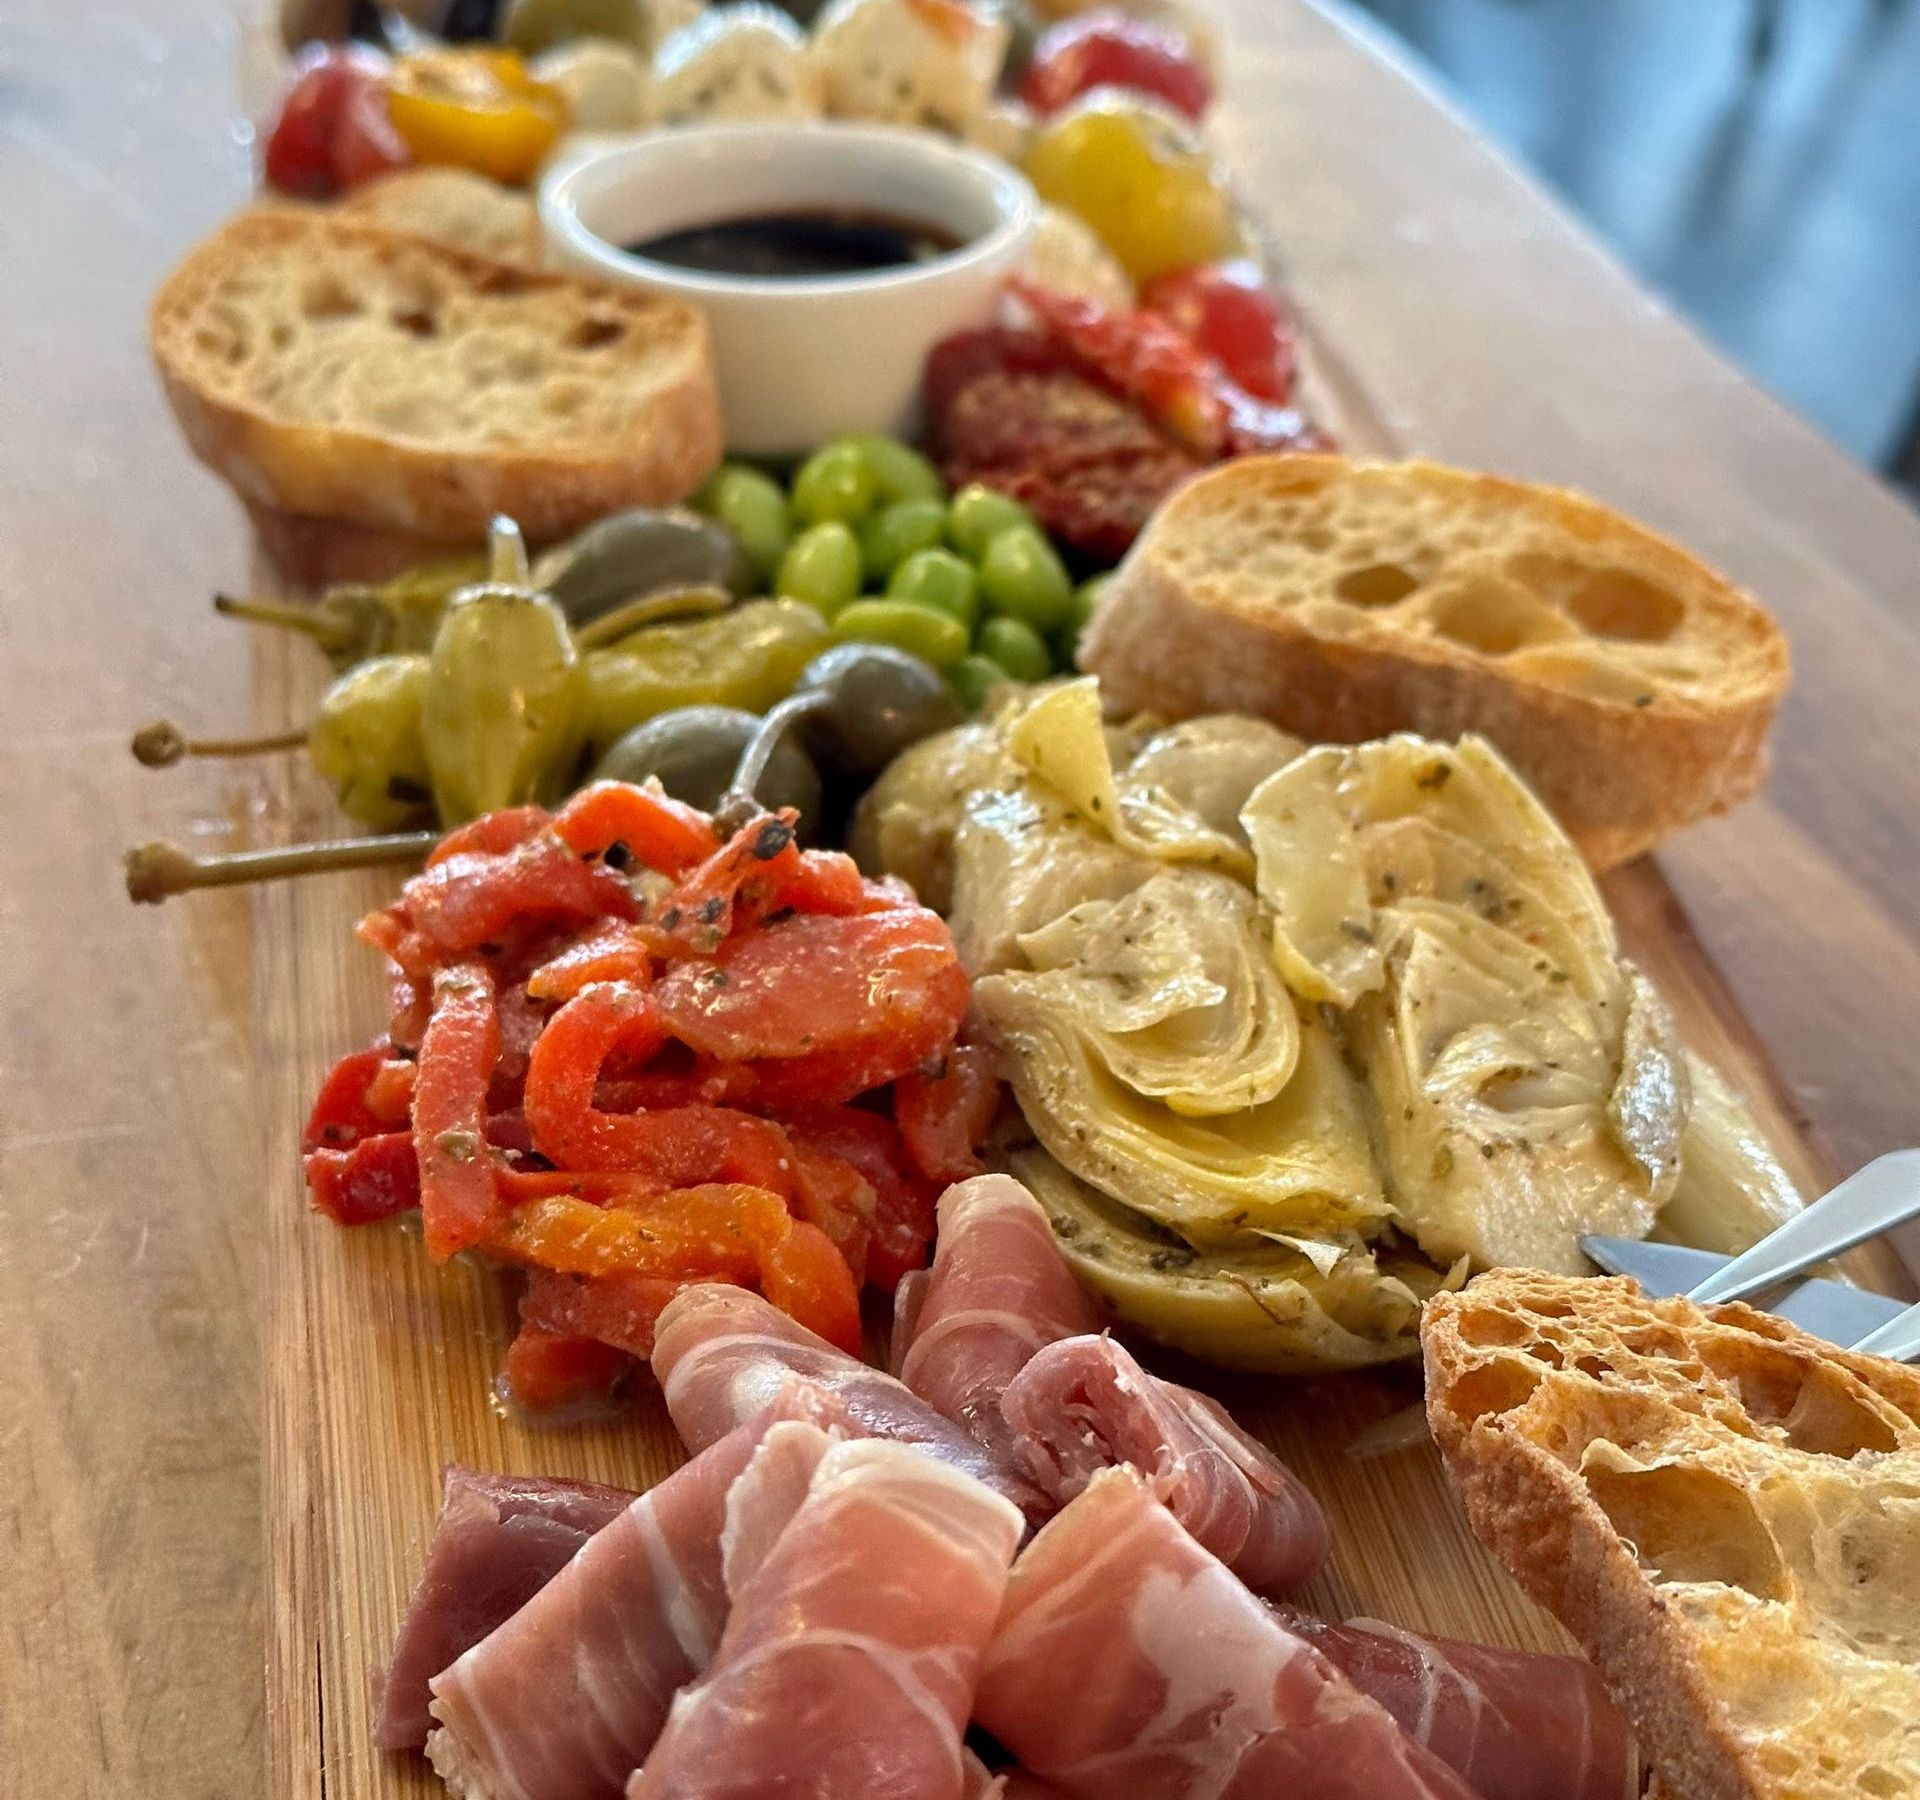 Antipasto board with bread, meats, cheese, and vegetables